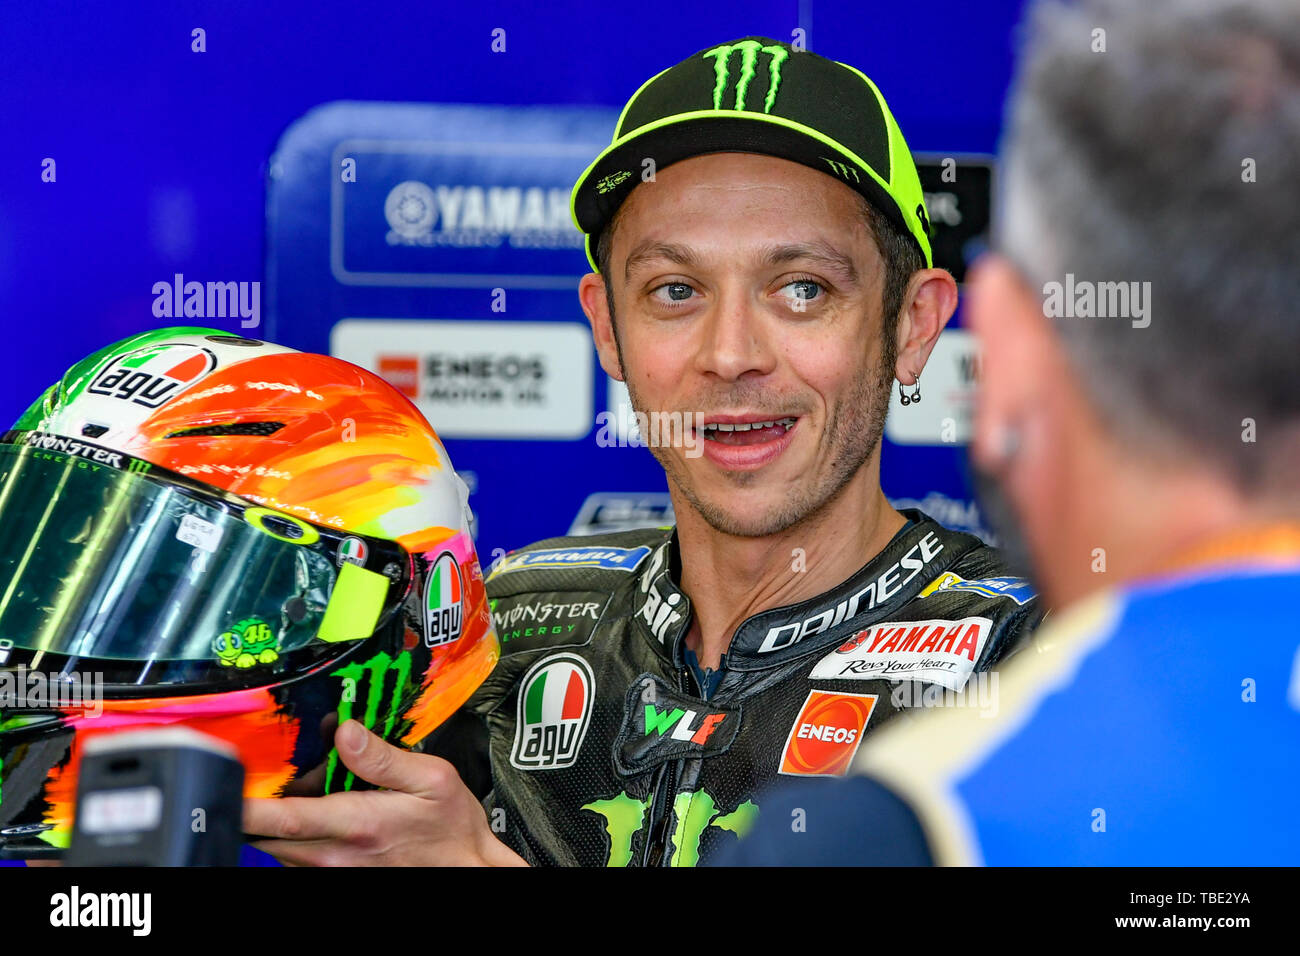 lustre Countryside Anbefalede Mugello, Italy. 01st June, 2019. Valentino Rossi shows the Mugello 2019  helmet Credit: Independent Photo Agency/Alamy Live News Stock Photo - Alamy